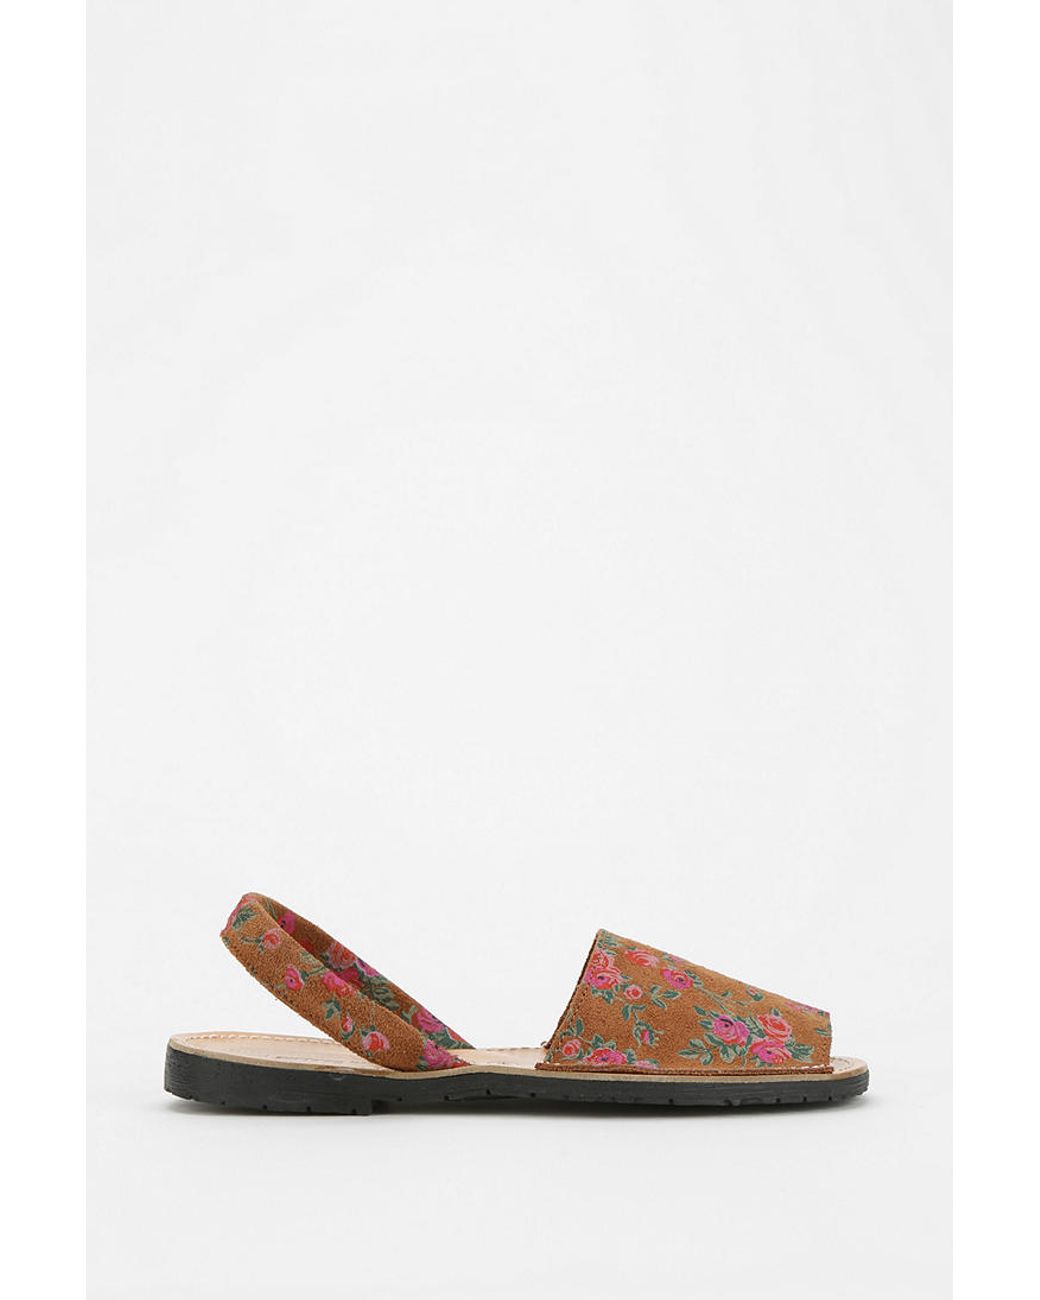 Jeffrey Campbell Floral Avarca Sandal in Brown | Lyst